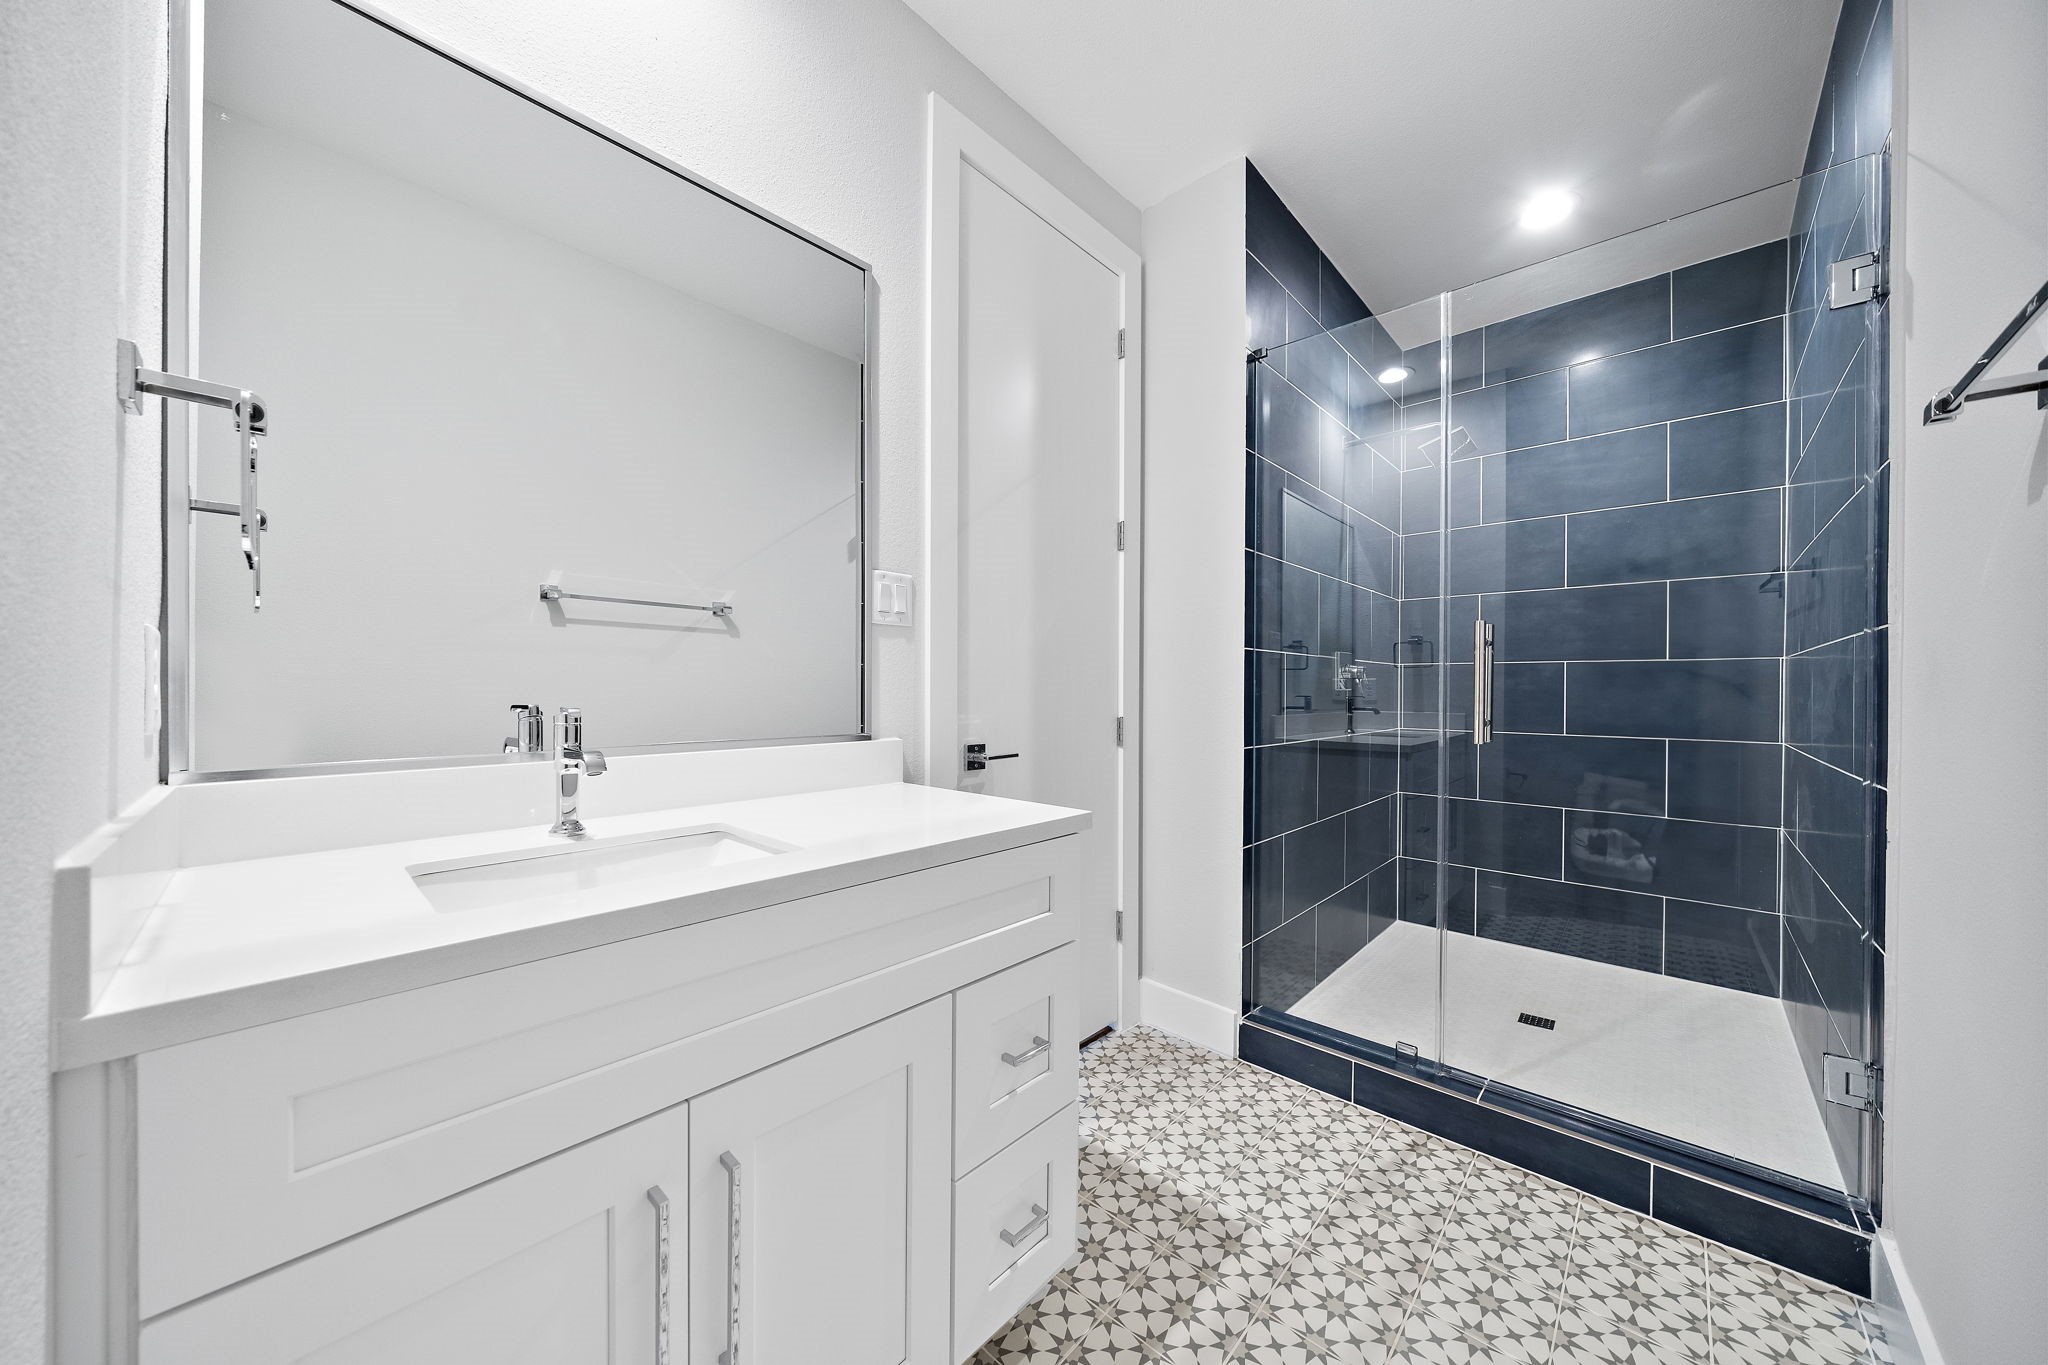 3rd floor ensuite bath with dramatic blue/gray tile.